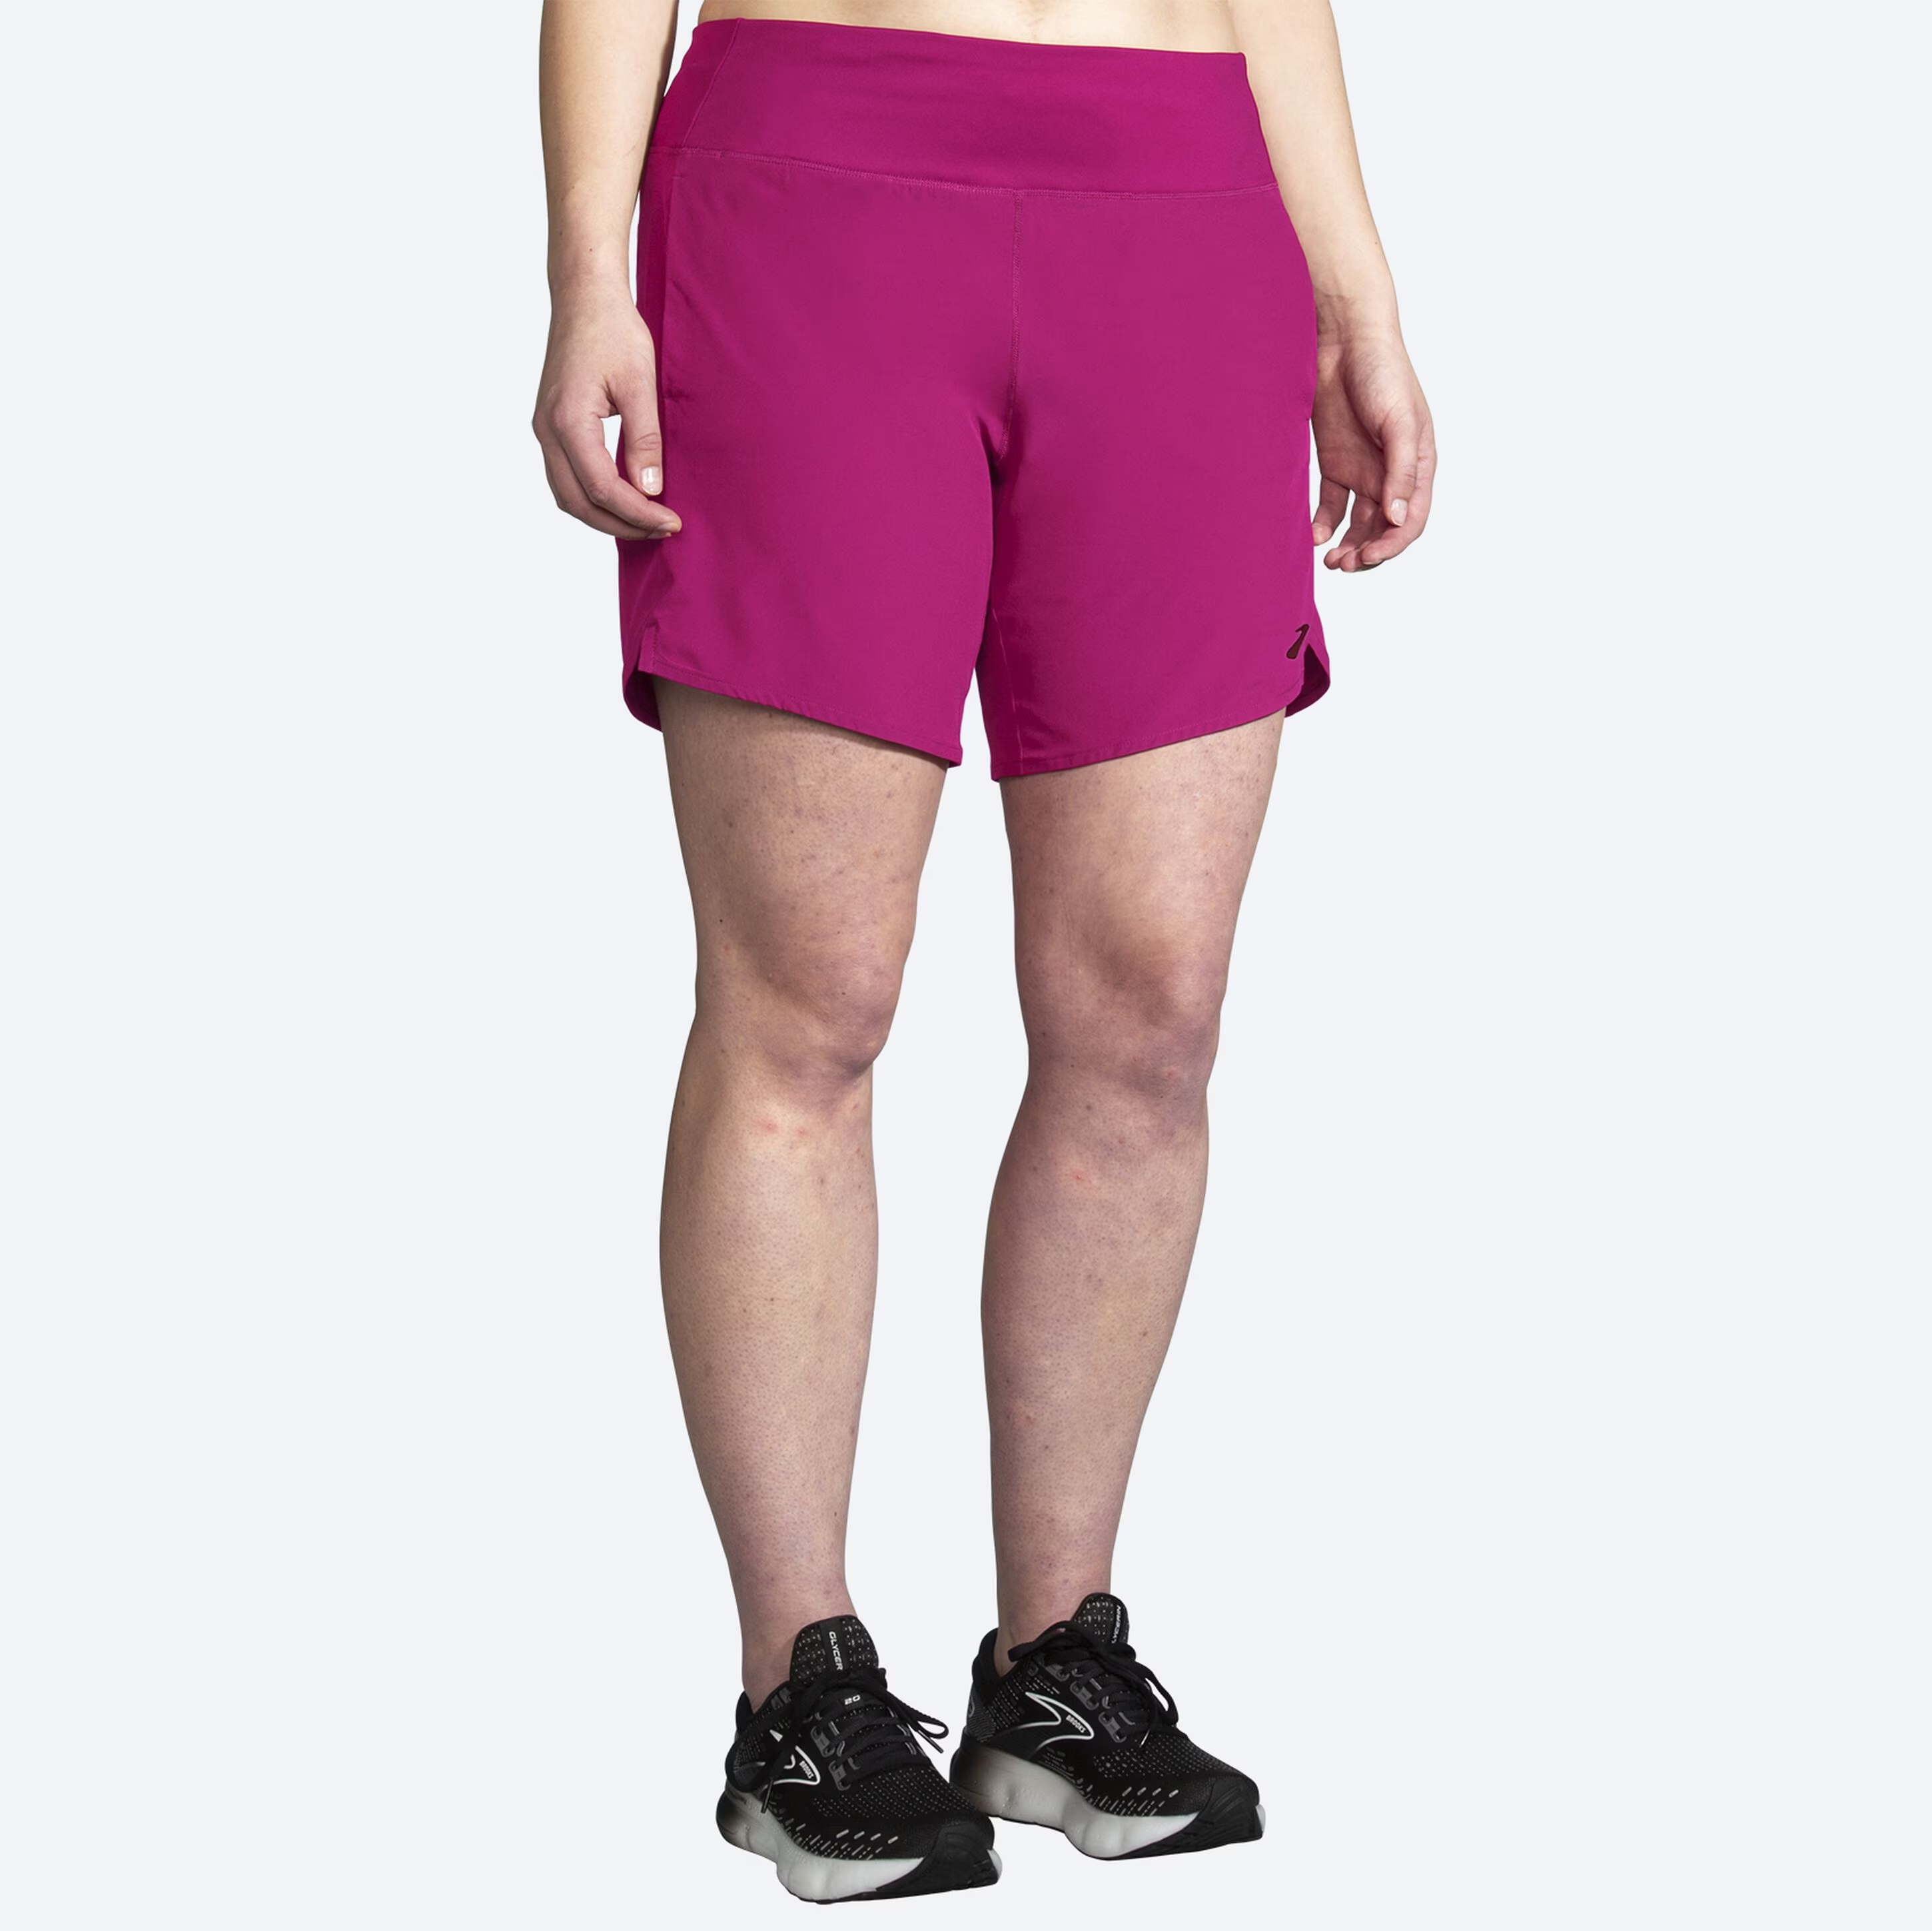 4 Running Shorts I Wear That Don't Ride Up, According to a Fitness